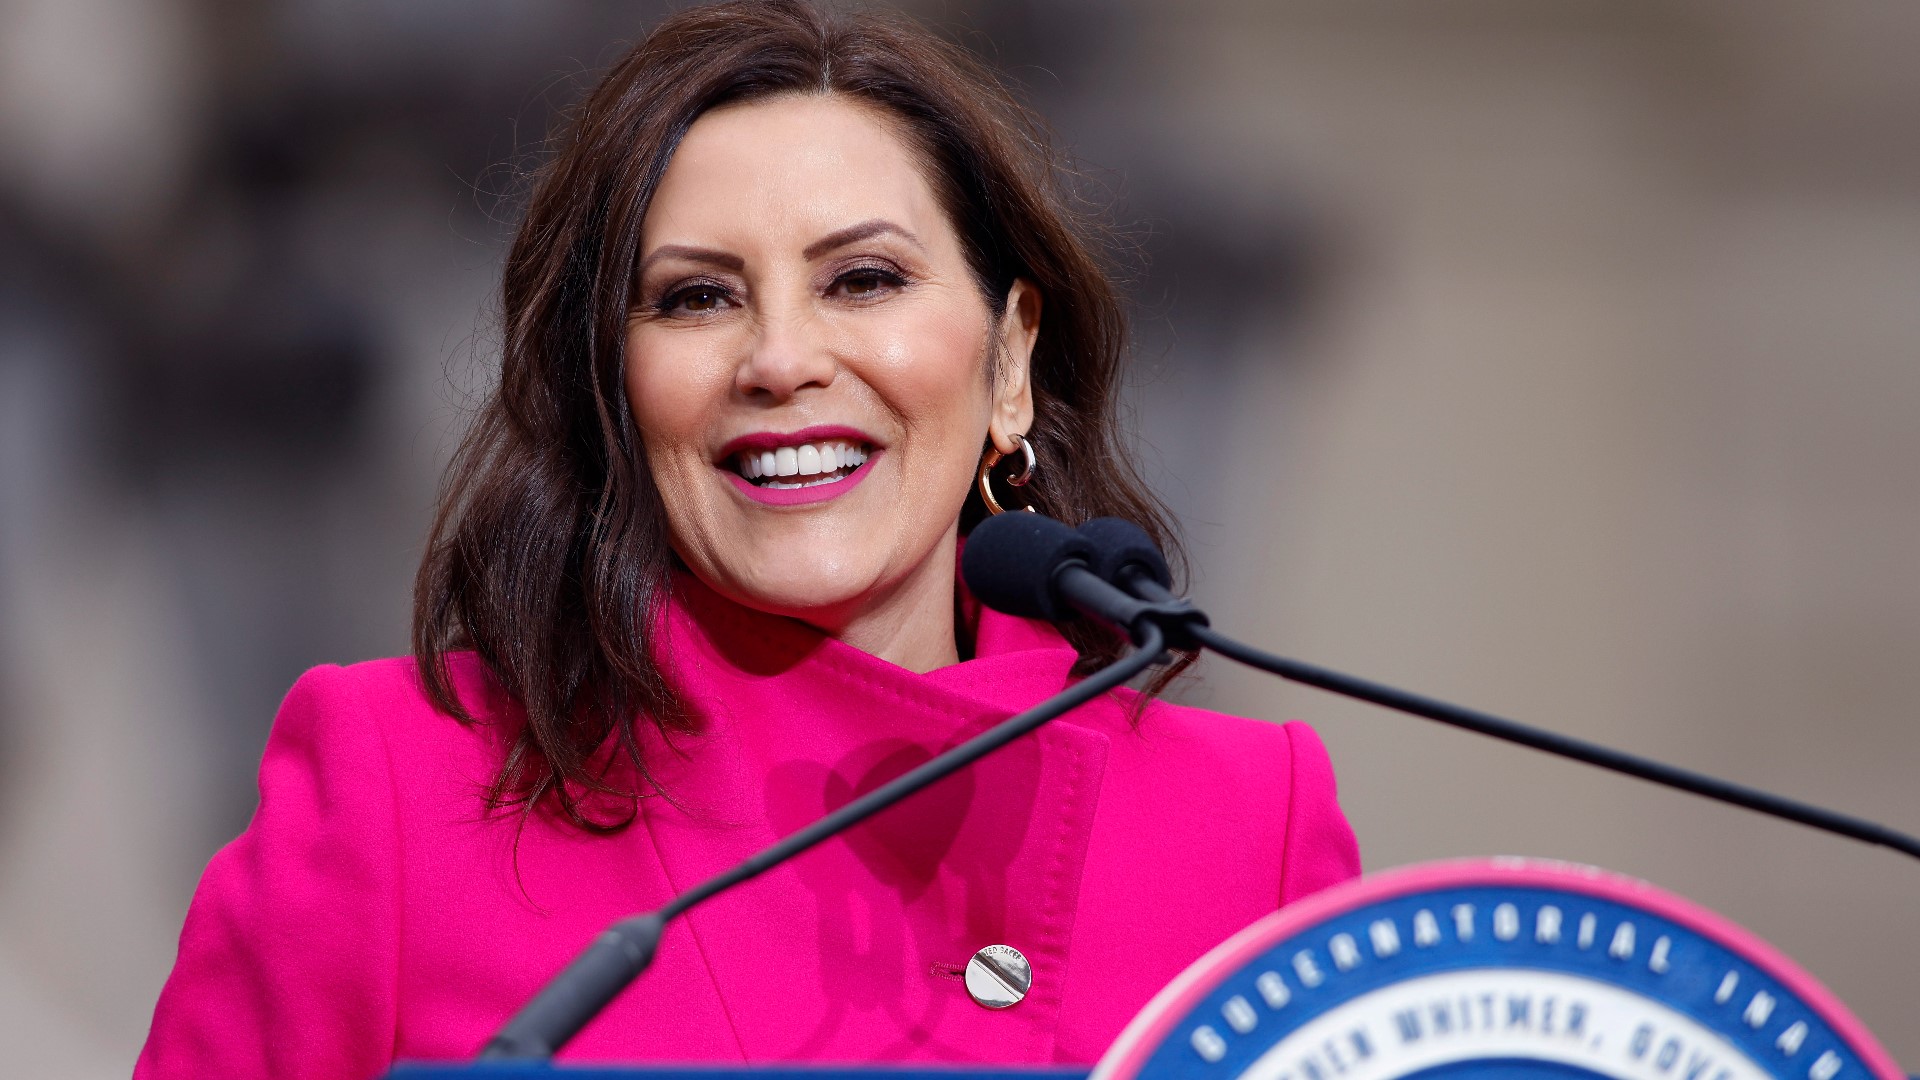 Wednesday evening, Michigan Gov. Gretchen Whitmer will give her fifth State of the State Address.